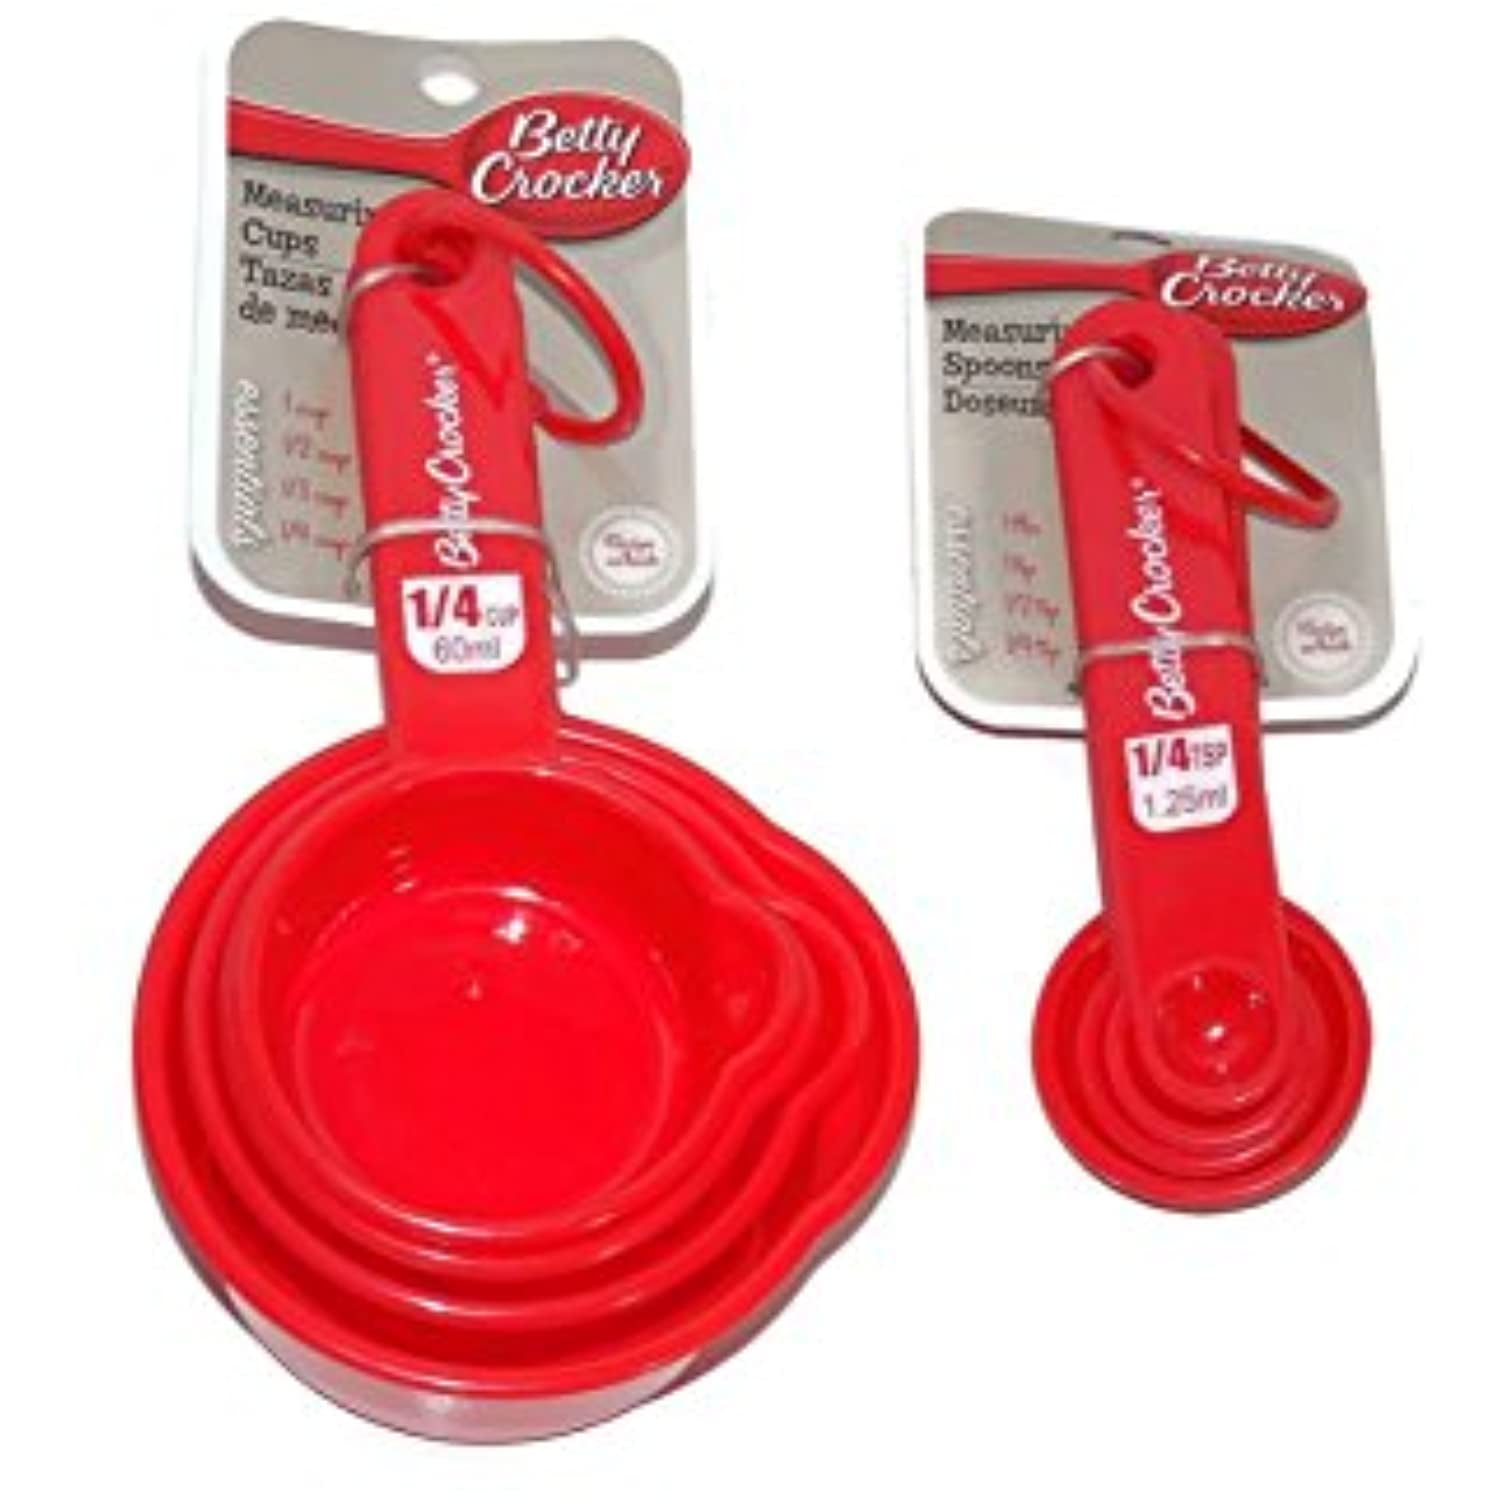 5 Piece Measuring Cups - Red Stick Spice Company